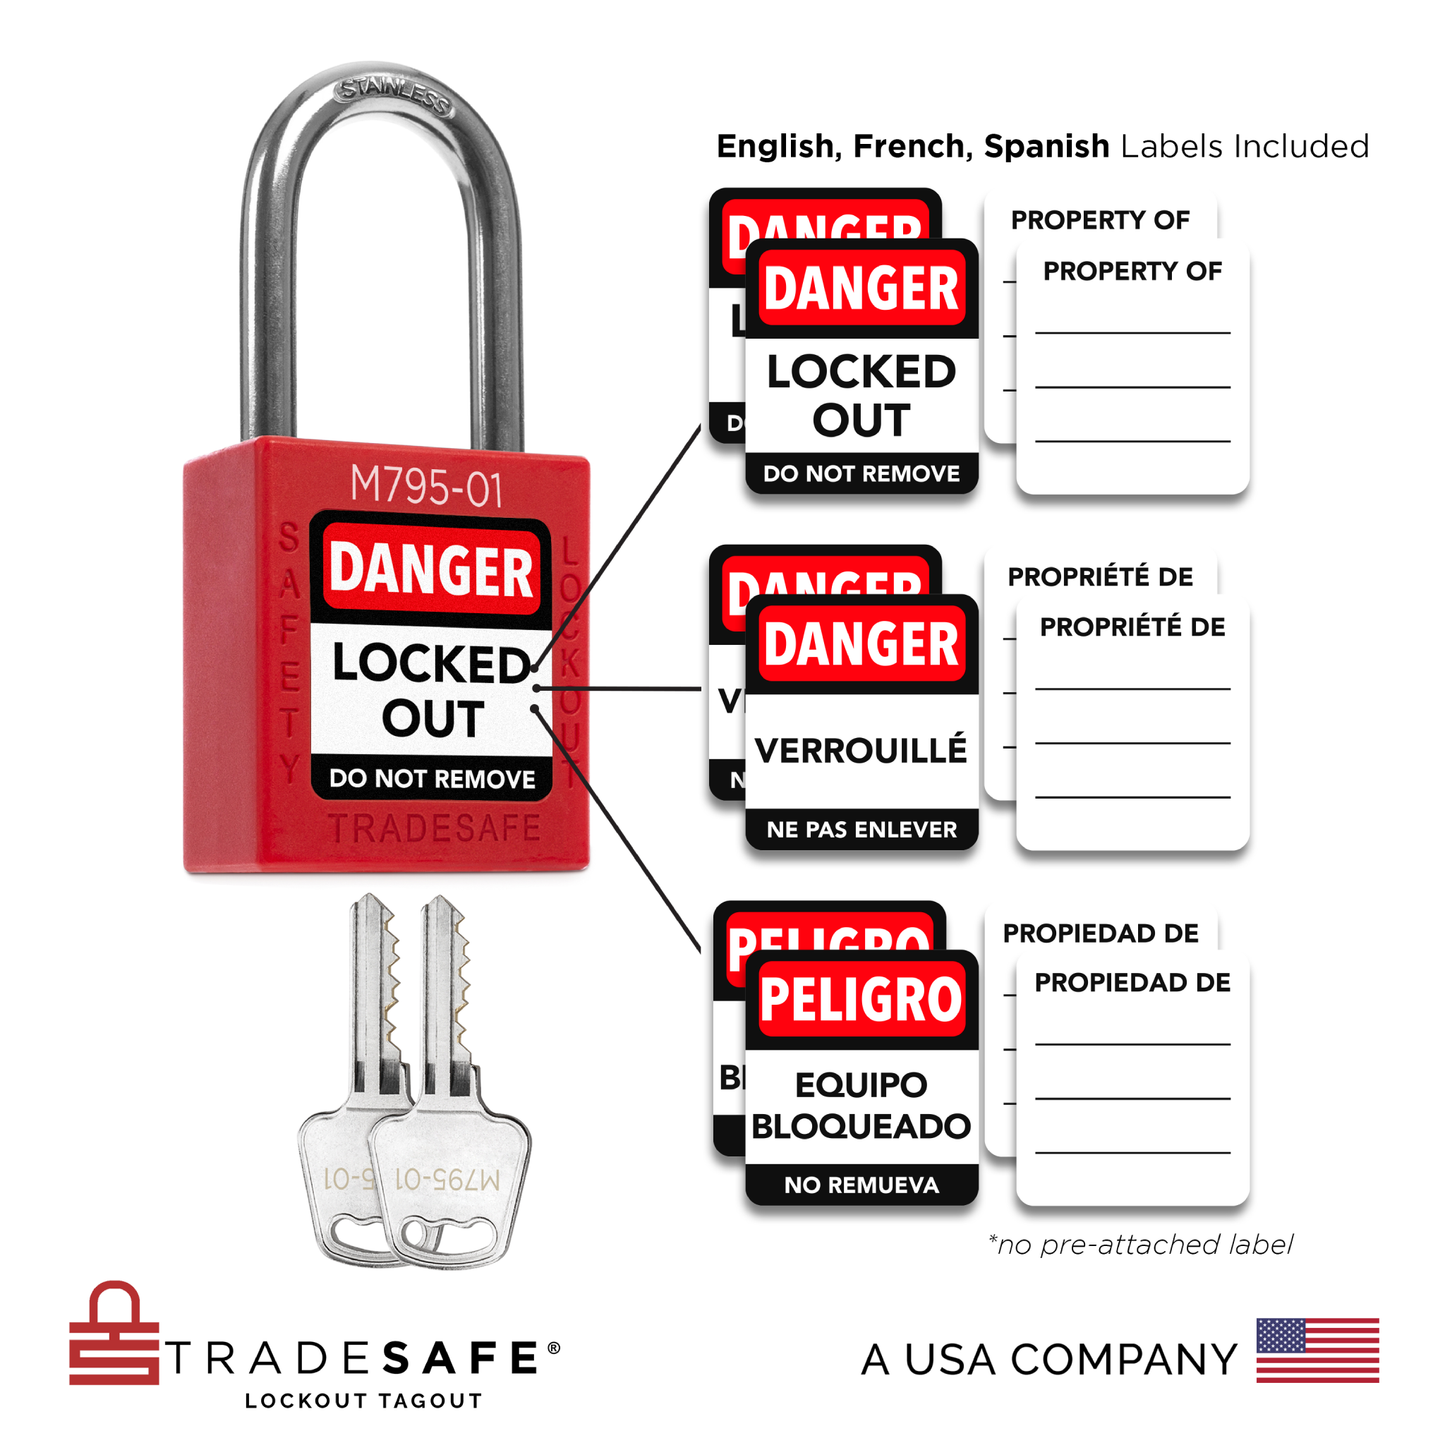 visual representation of red keyed different lock with master key including labels in three languages